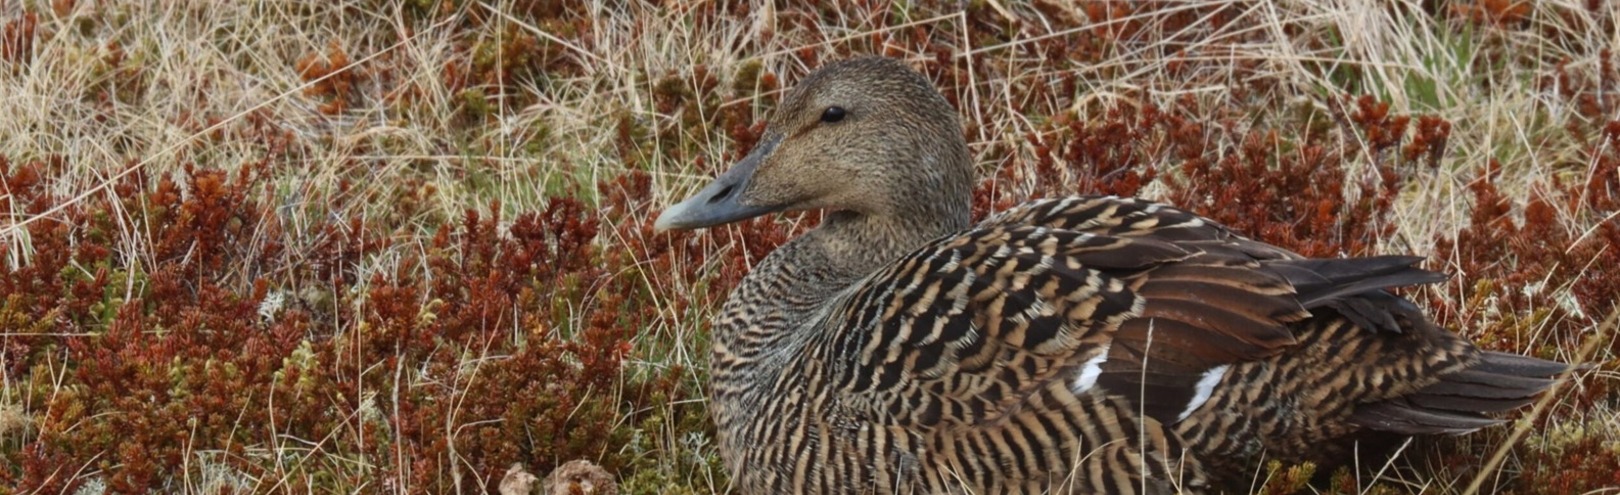 Mink dealt a serious blow to the eider duck population - Available at University of Iceland